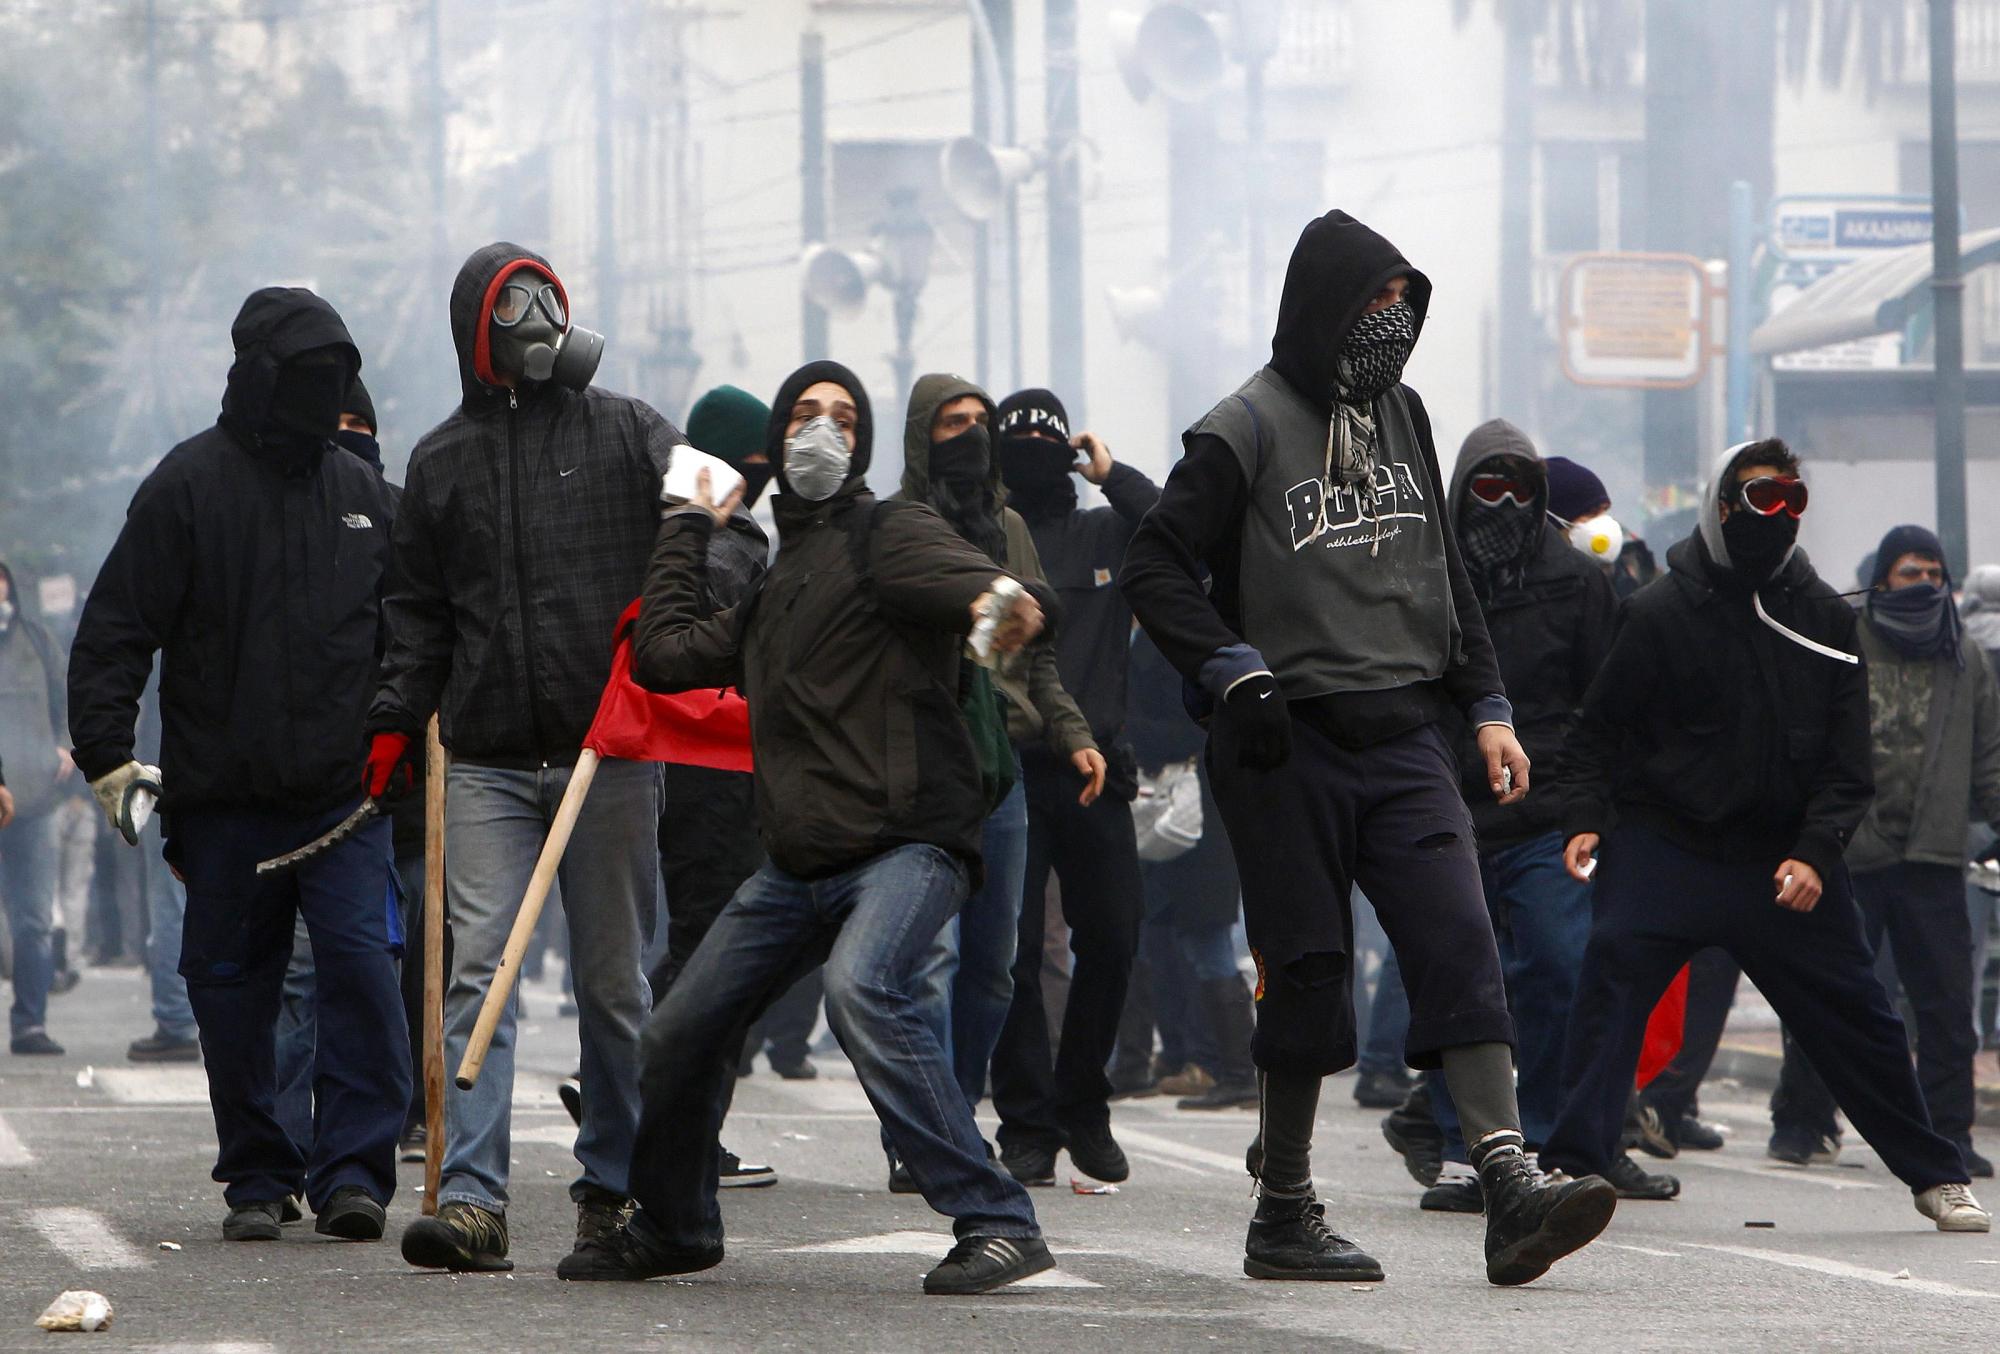 Greek protests against austerity measures escalates